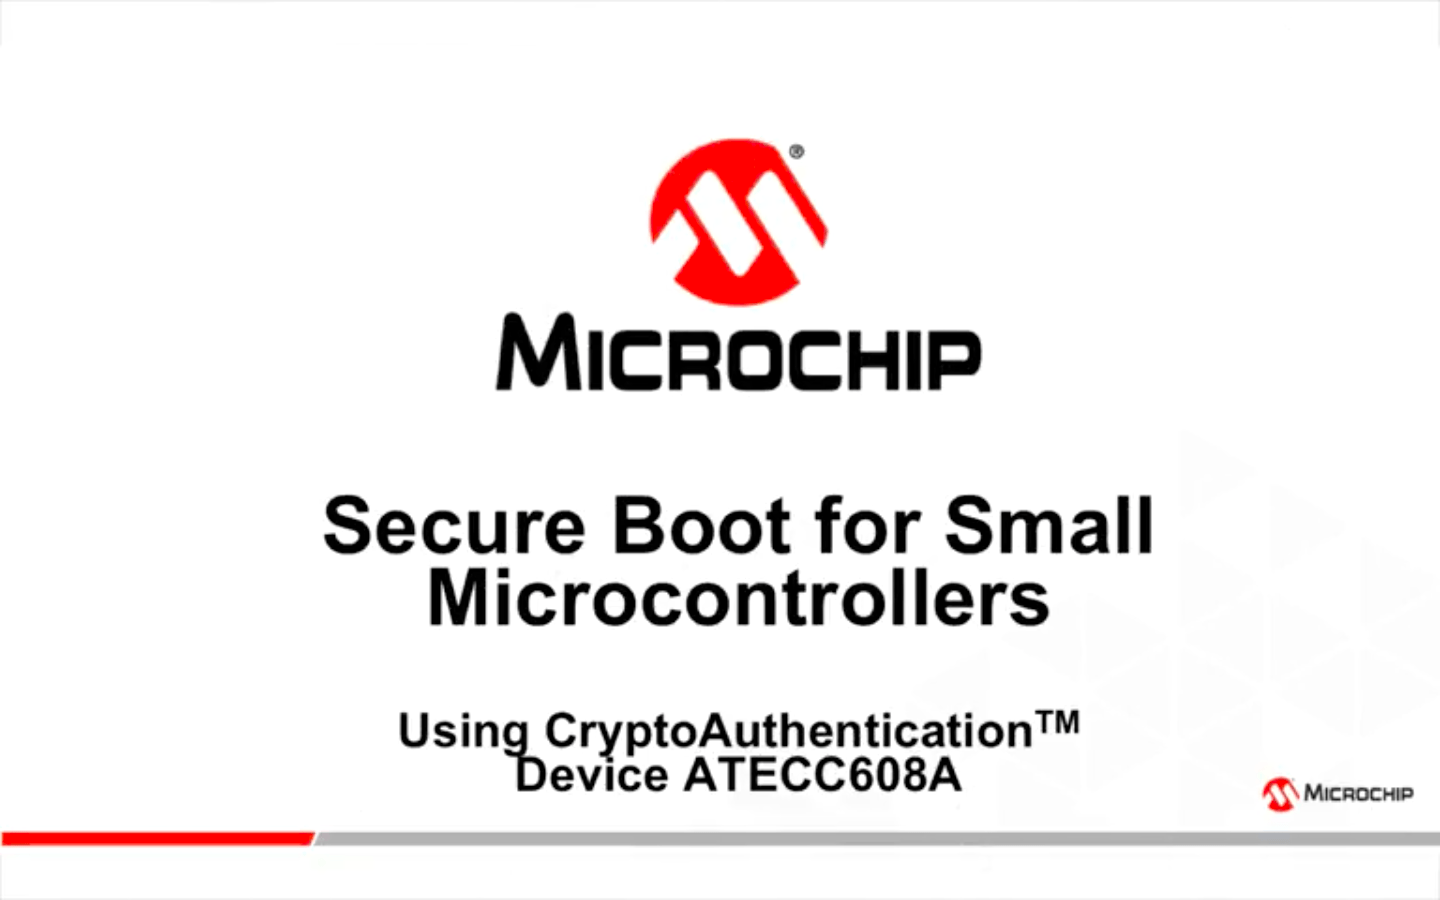 Microchip Logo - Internet of Things. Technology. Embedded Security. Microchip